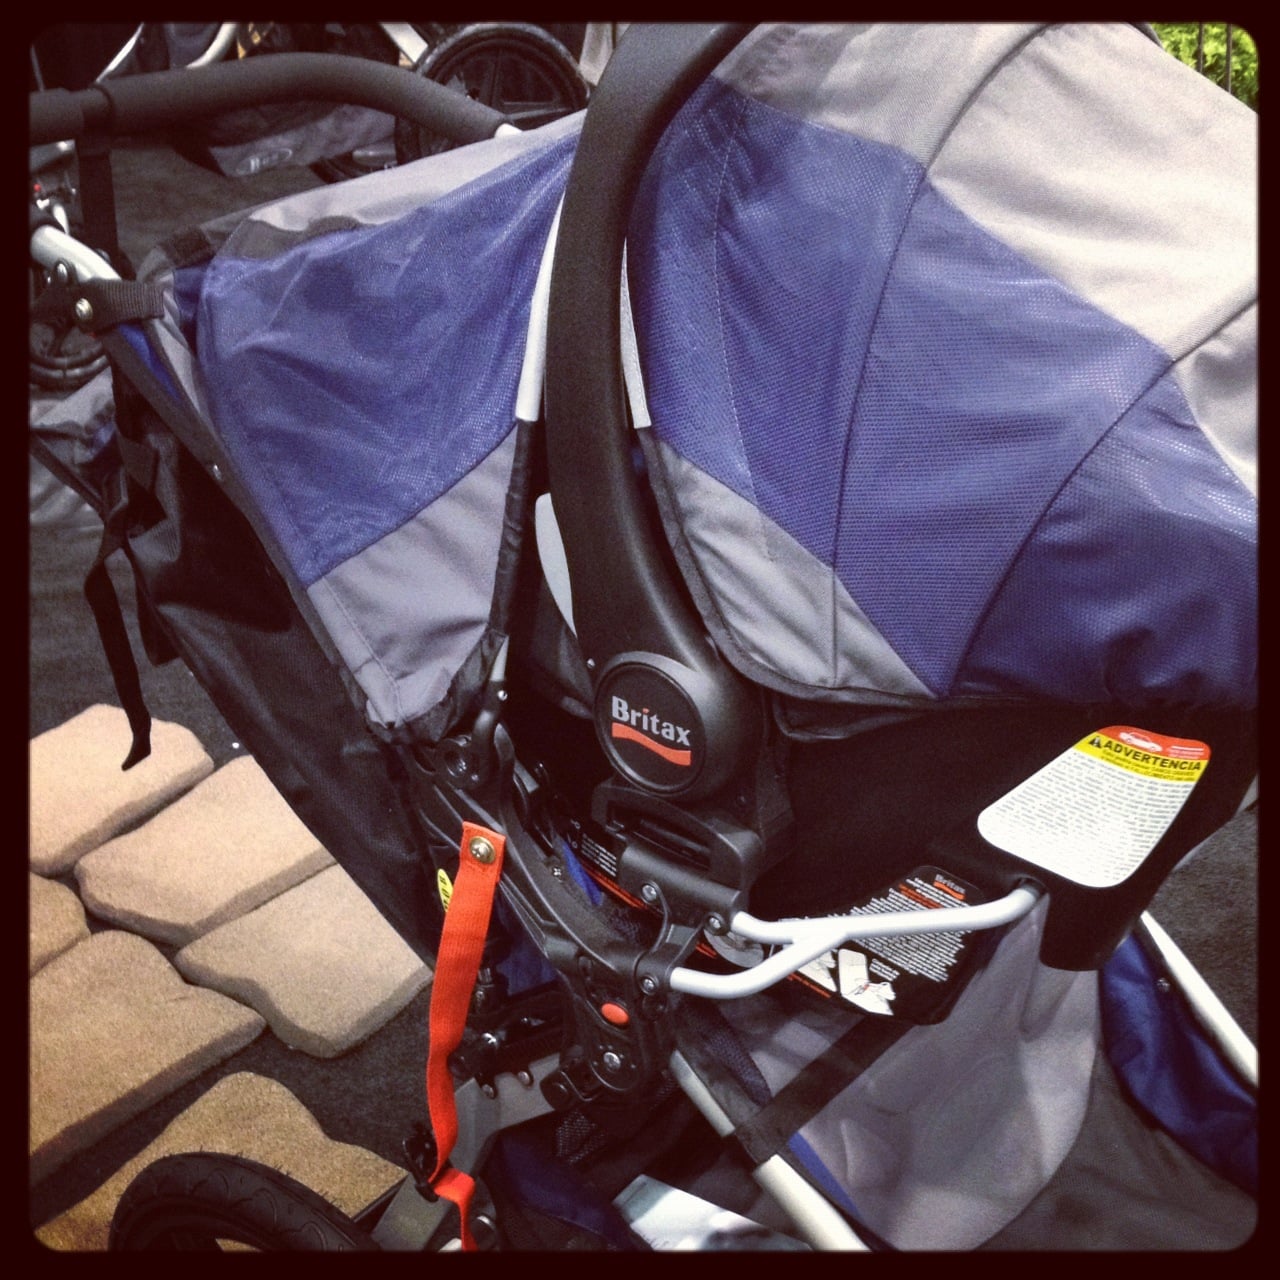 what strollers is the britax b safe compatible with